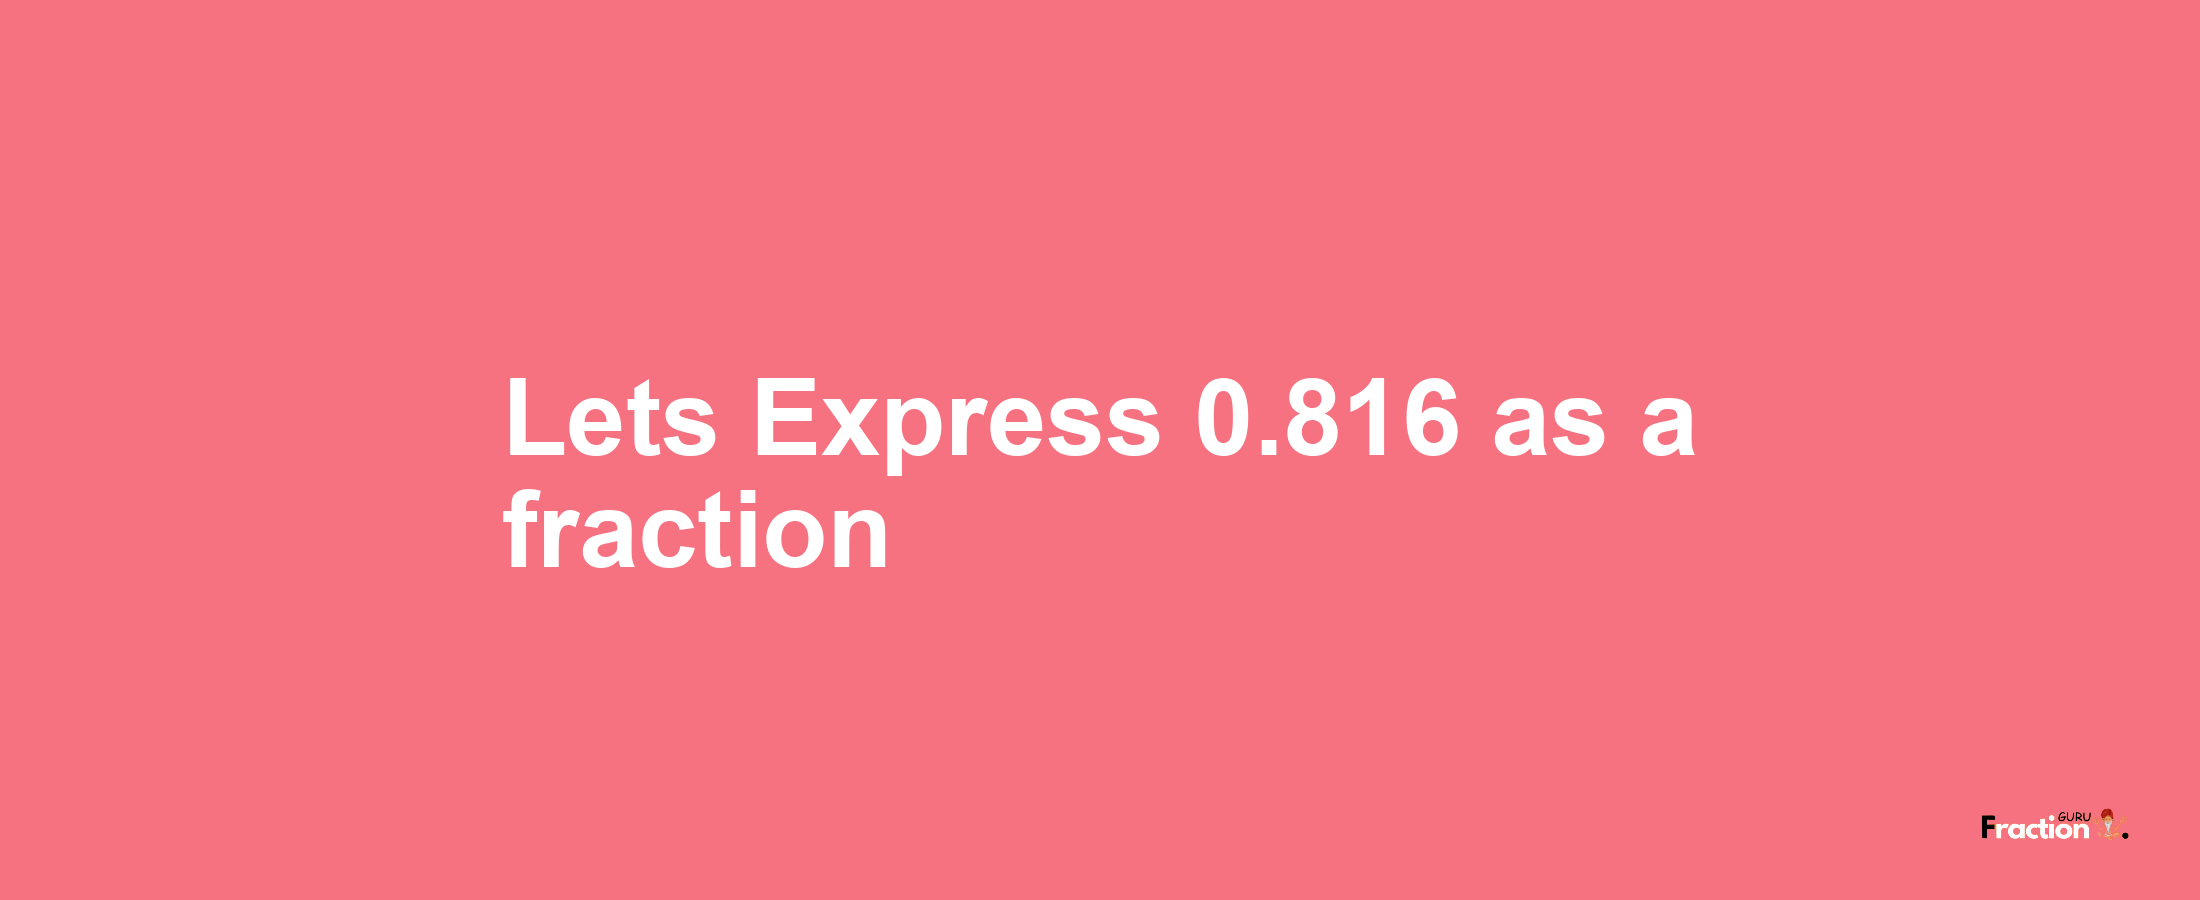 Lets Express 0.816 as afraction